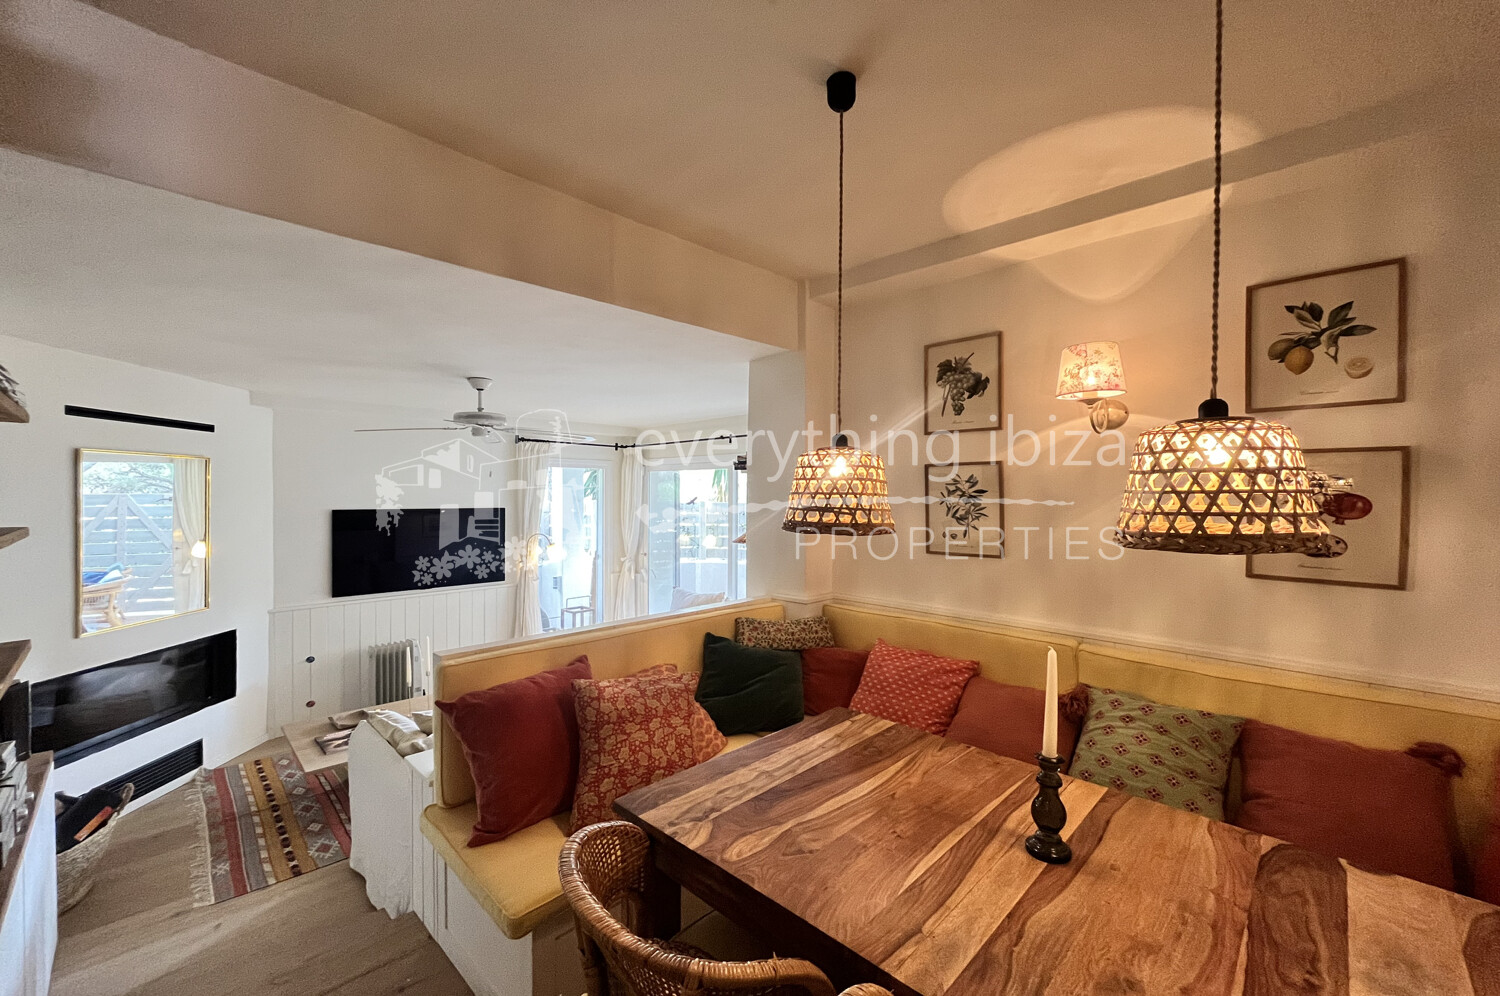 Recently Renovated Ground Floor Quality Apartment, ref. 1538, for sale in Ibiza by everything ibiza Properties